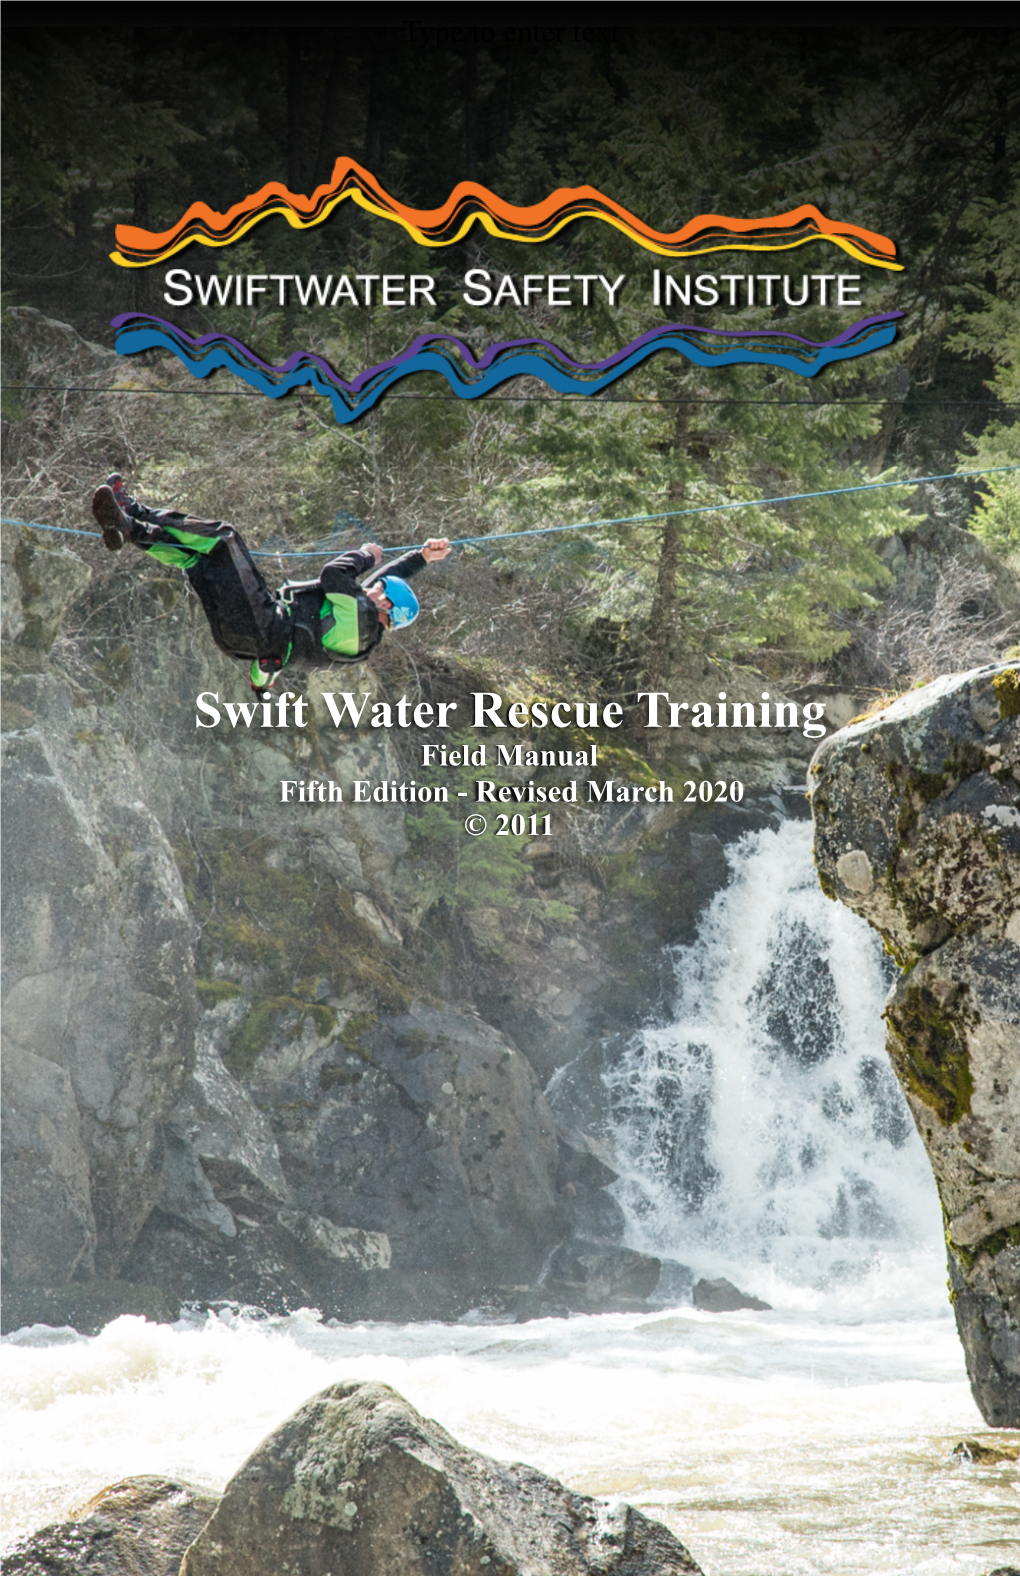 Swift Water Rescue Training Field Manual Fifth Edition - Revised March 2020 © 2011 SIMPLE